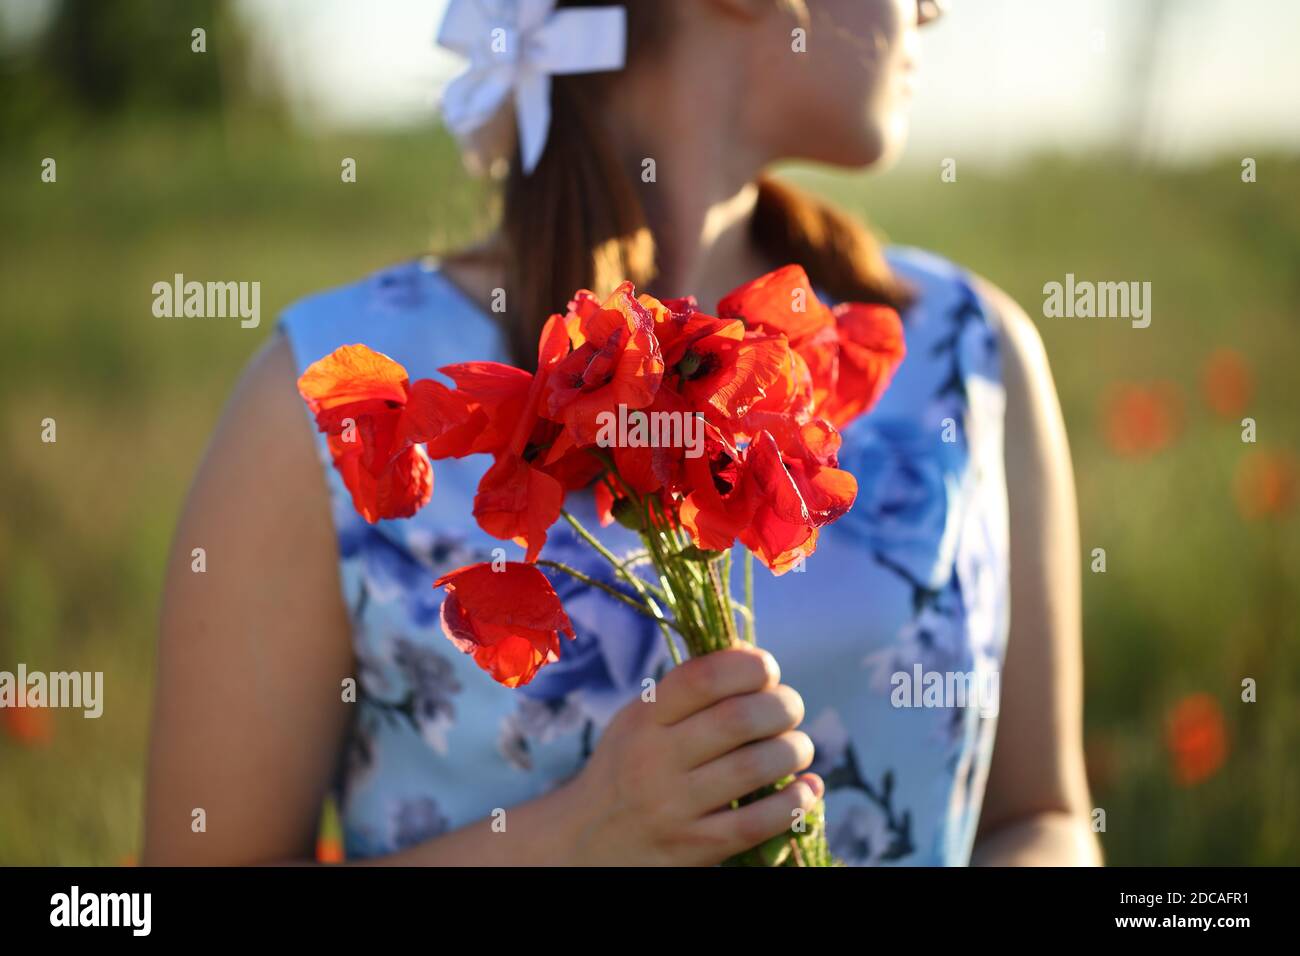 Hands with a bouquet of poppies Stock Photo